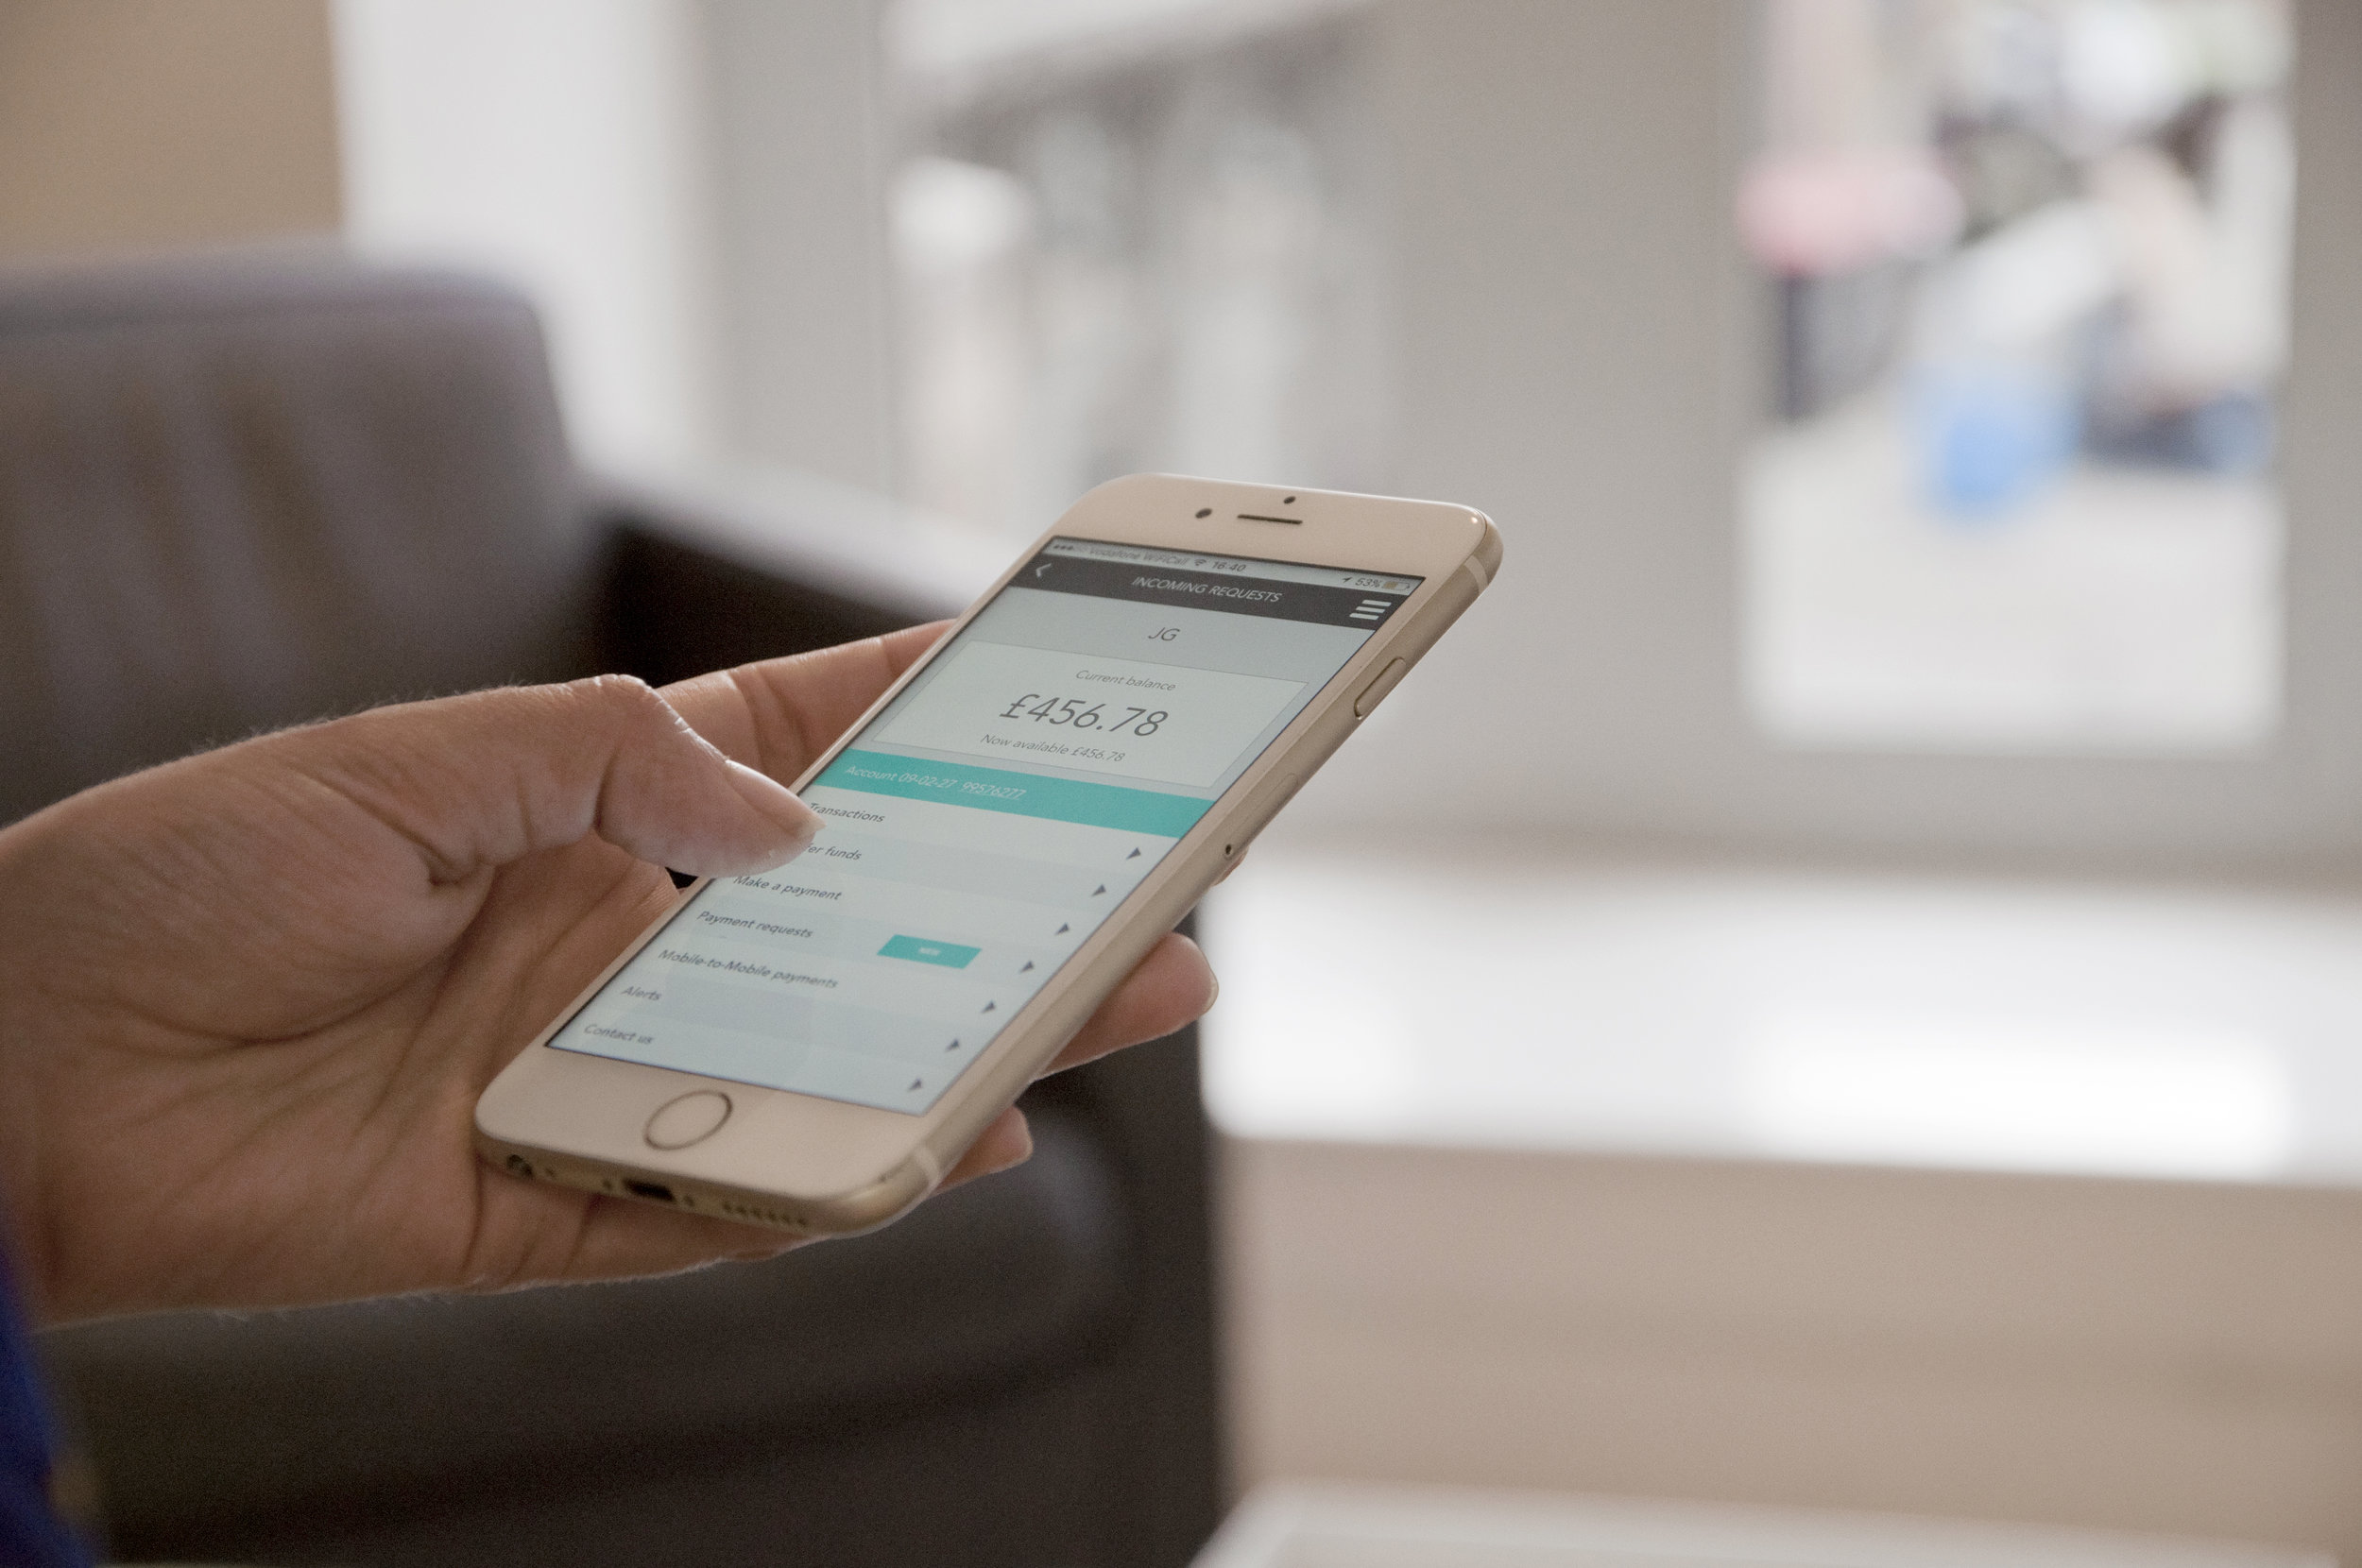   We created high fidelity interactive prototypes of the Payer experience for mobile devices.  